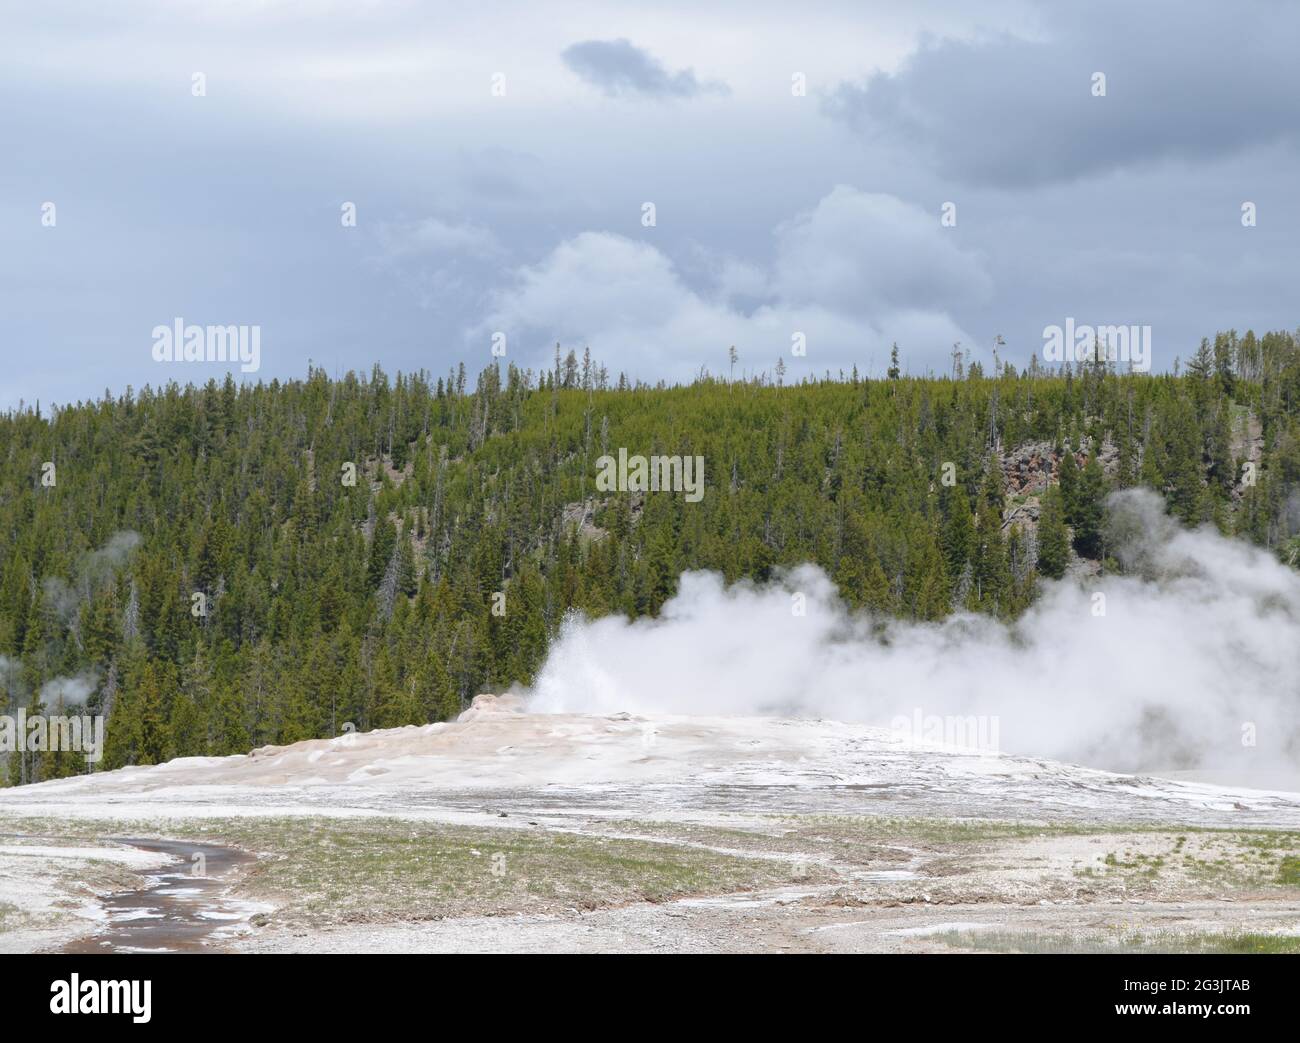 Late Spring in Yellowstone National Park: Old Faithful Geyser Starts to Erupt in the Old Faithful Historic District in the Upper Geyser Basin Area Stock Photo